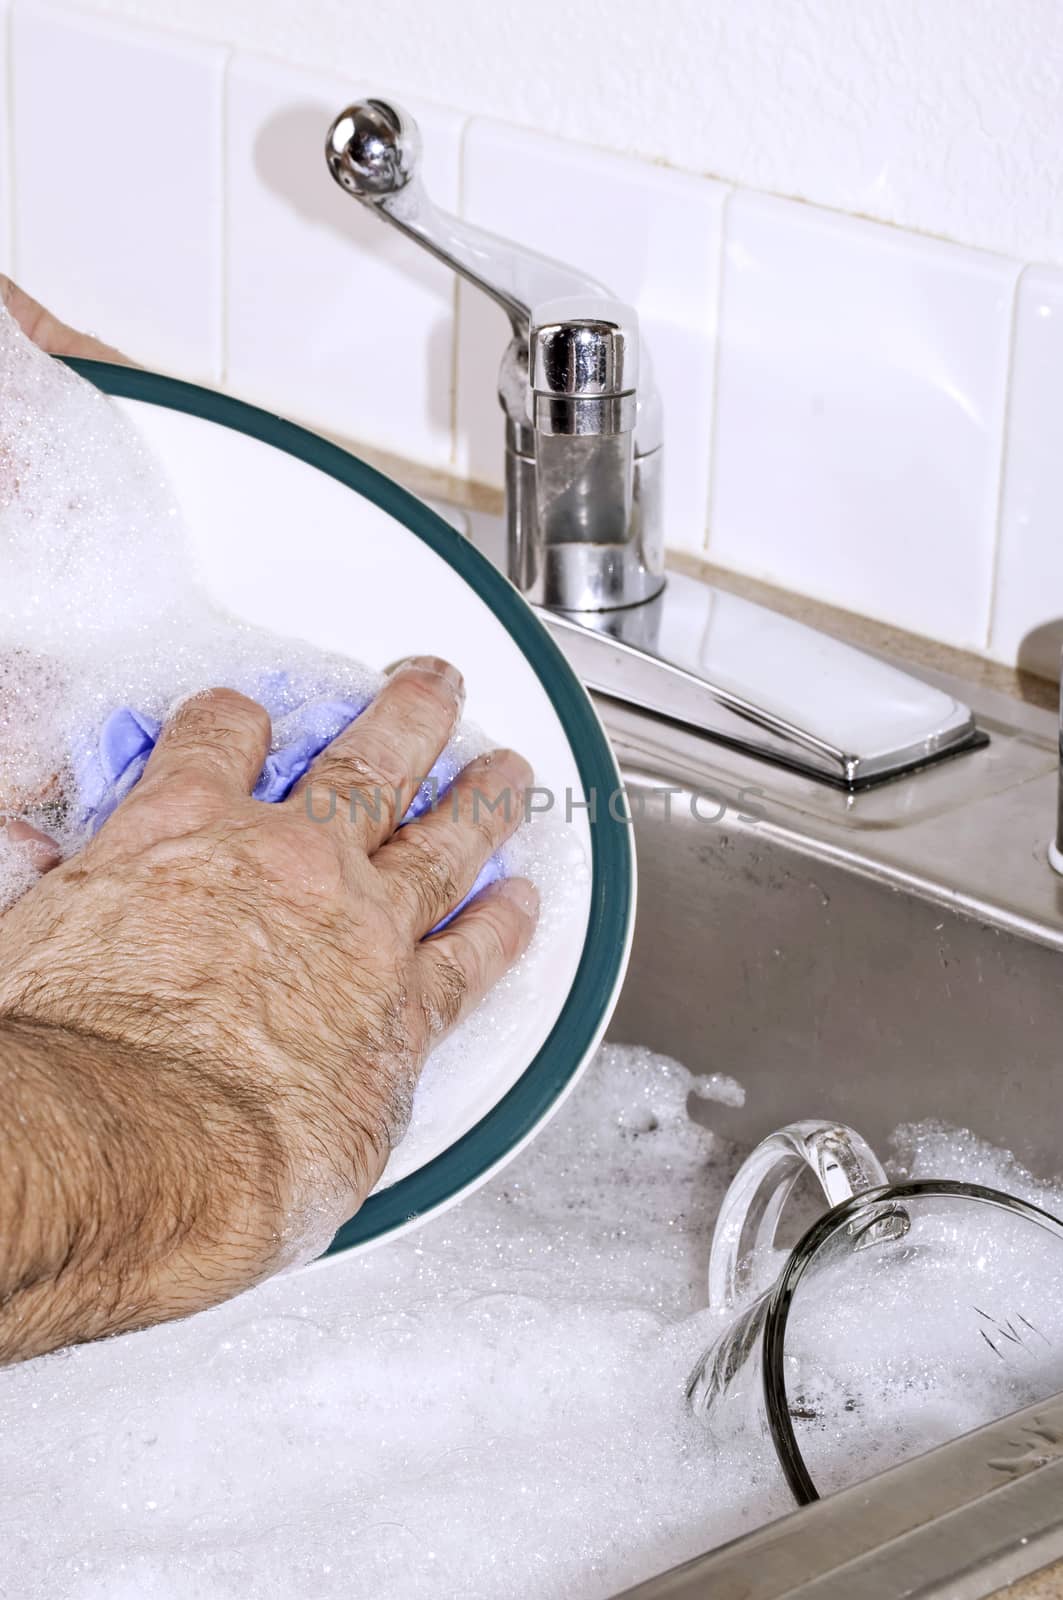 Hand washing a dinner plate in the kitchen sink.